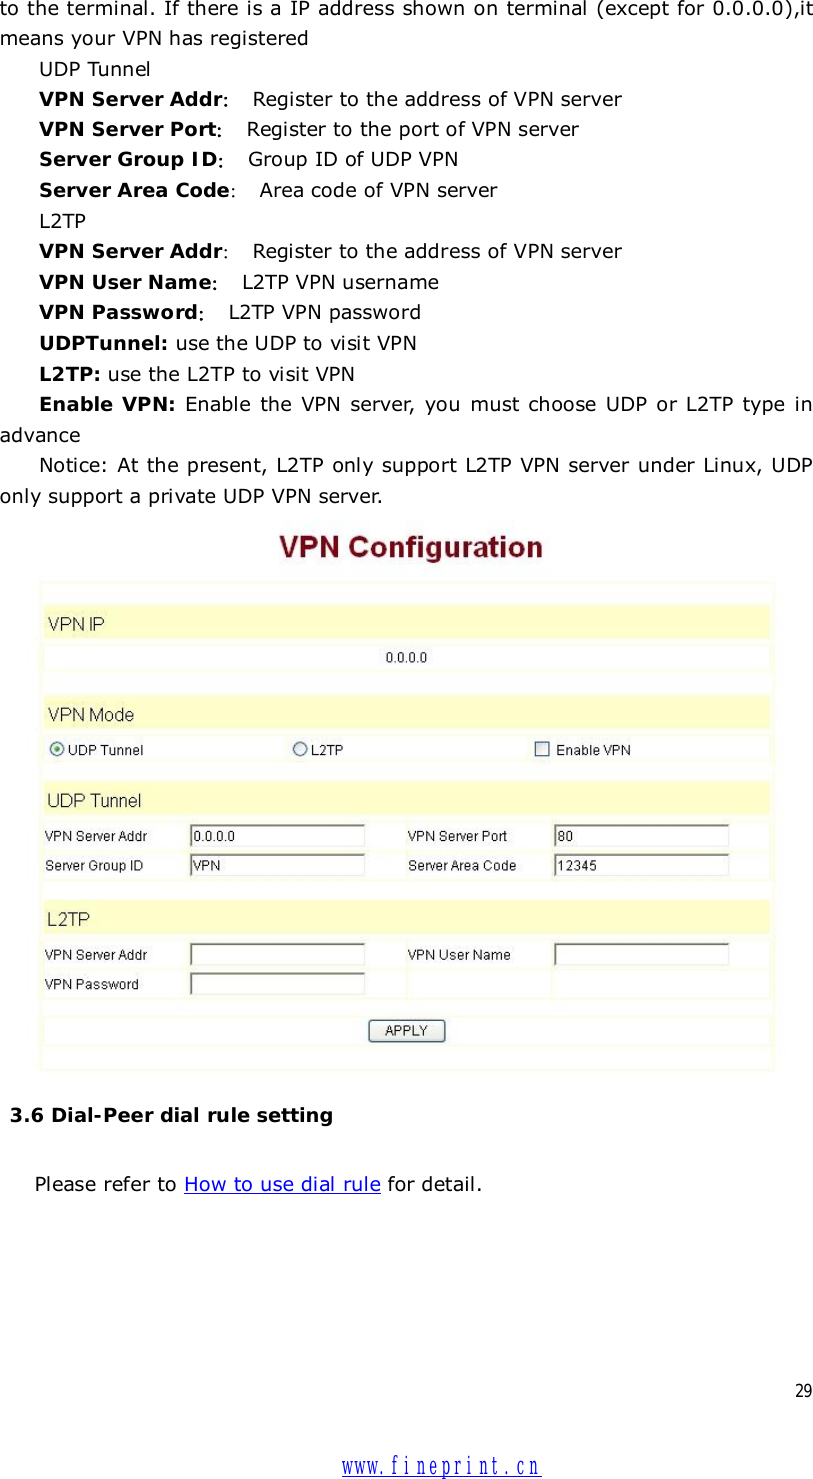  29 to the terminal. If there is a IP address shown on terminal (except for 0.0.0.0),it means your VPN has registered UDP Tunnel VPN Server Addr： Register to the address of VPN server  VPN Server Port： Register to the port of VPN server Server Group ID： Group ID of UDP VPN Server Area Code： Area code of VPN server L2TP VPN Server Addr： Register to the address of VPN server VPN User Name： L2TP VPN username   VPN Password： L2TP VPN password UDPTunnel: use the UDP to visit VPN L2TP: use the L2TP to visit VPN Enable VPN: Enable the VPN server, you must choose UDP or L2TP type in advance Notice: At the present, L2TP only support L2TP VPN server under Linux, UDP only support a private UDP VPN server.    3.6 Dial-Peer dial rule setting  Please refer to How to use dial rule for detail.  www.fineprint.cn